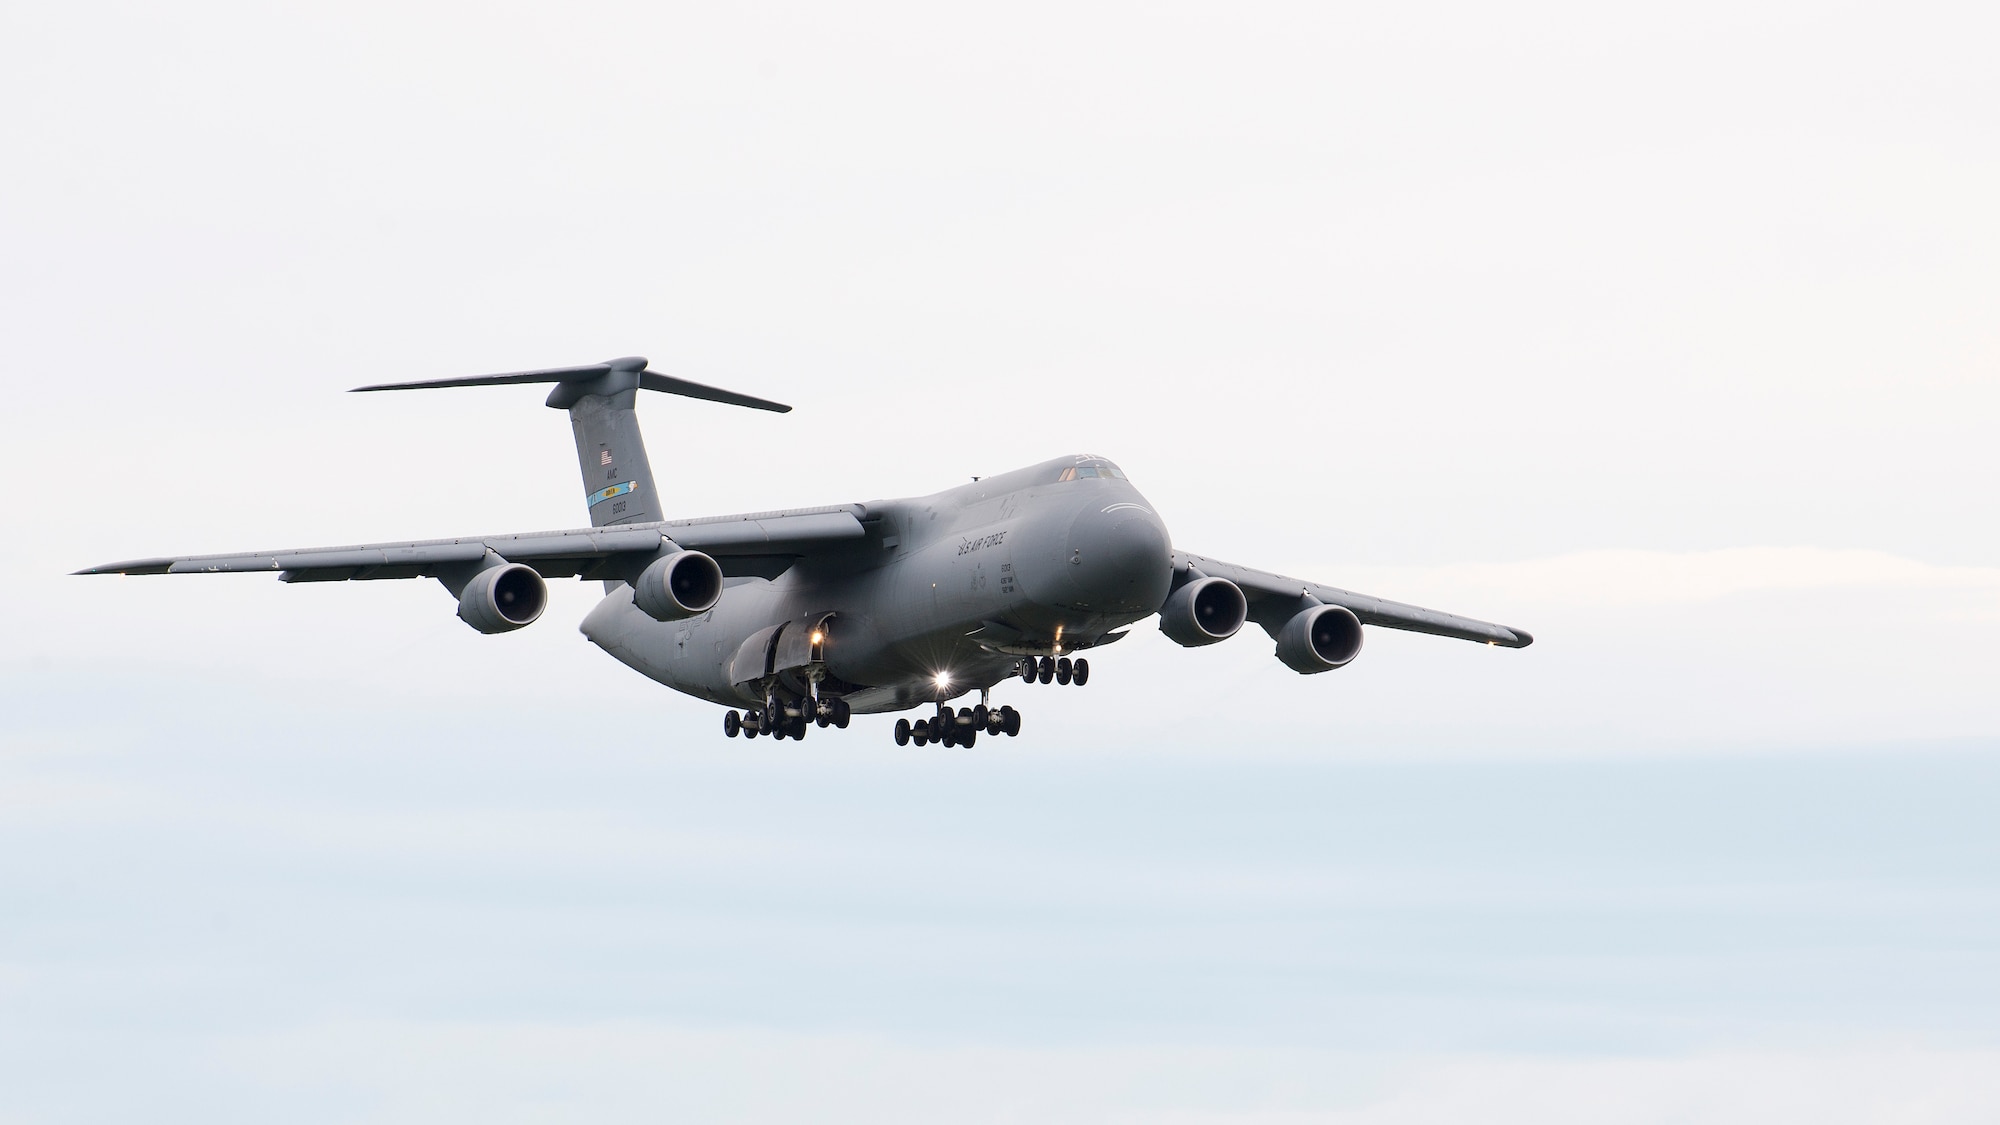 A C-5M Super Galaxy, operated by the C-5M Formal Training Unit, approaches runway 01-19 for landing June 8, 2017, at Dover Air Force Base, Del. The C-5M is the largest transport aircraft operated by the U.S. Air Force and provides heavy intercontinental-range strategic airlift capabilities. (U.S. Air Force photo by Senior Airman Zachary Cacicia)